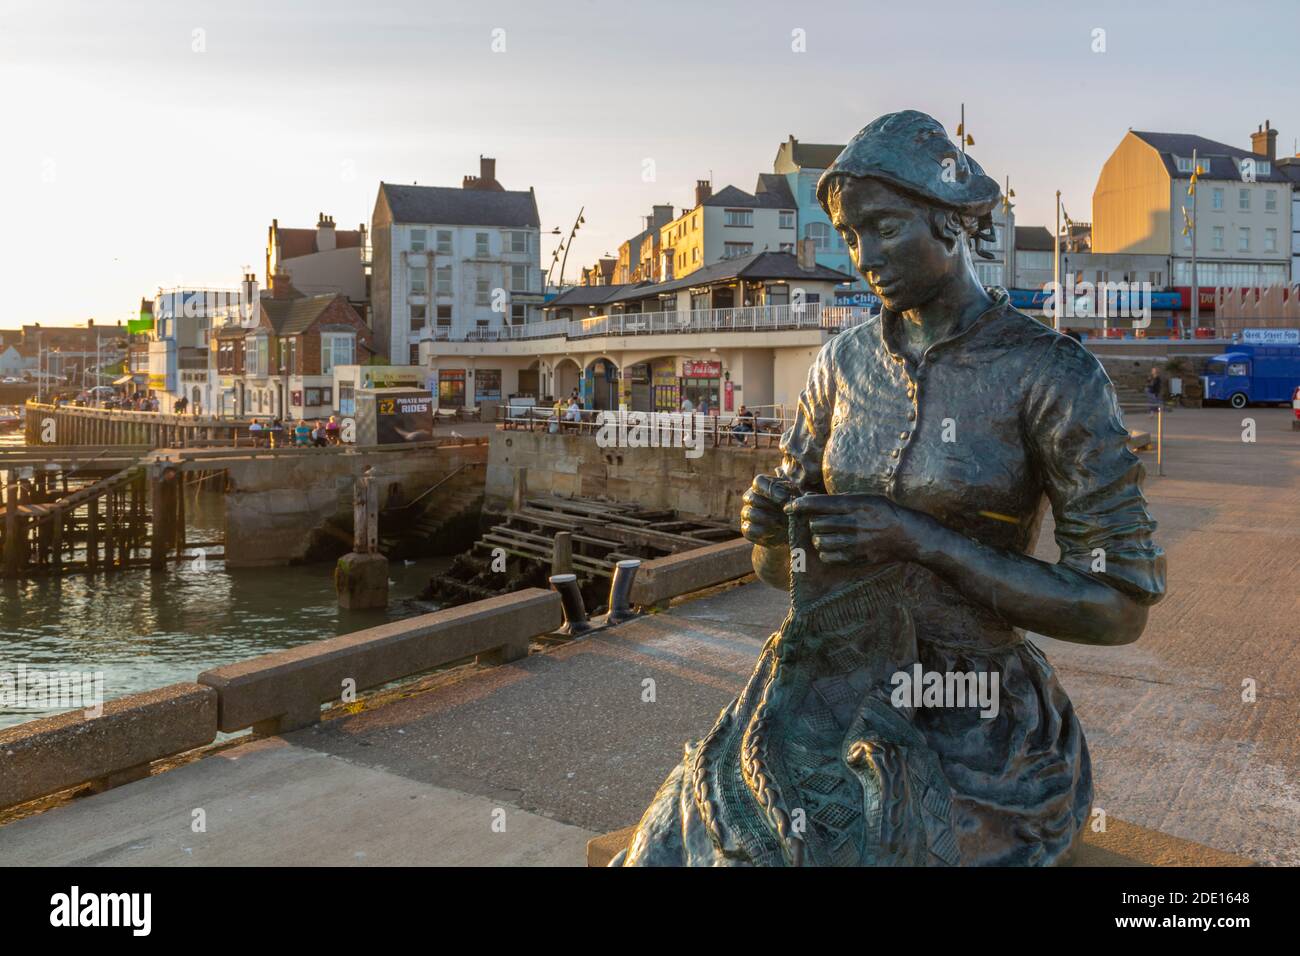 View of the Gansey Girl statue and harbour at sunset, Bridlington, East Yorkshire, England, United Kingdom, Europe Stock Photo